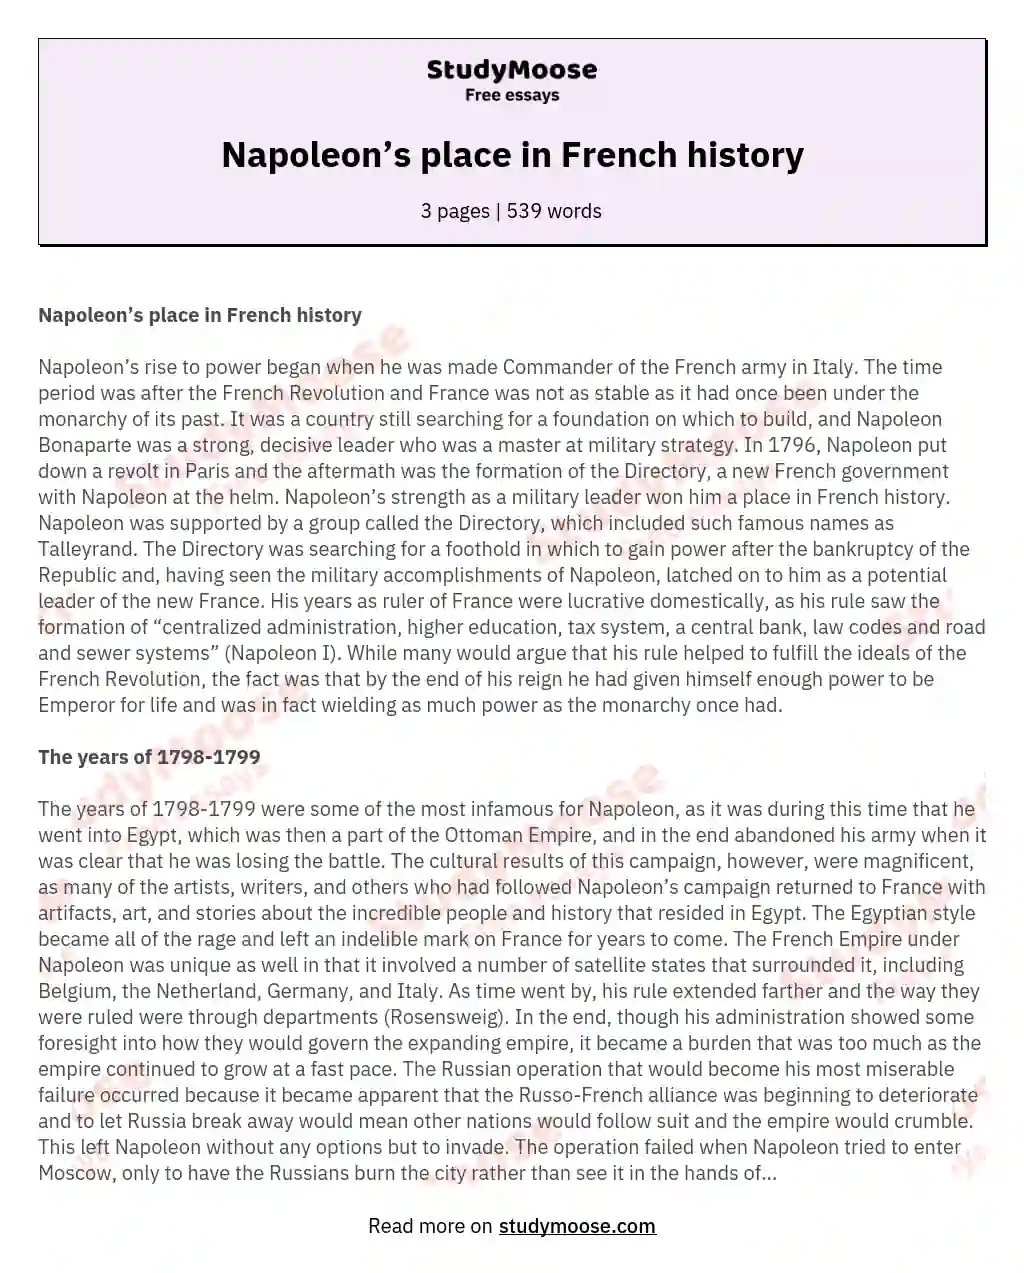 Napoleon’s place in French history essay